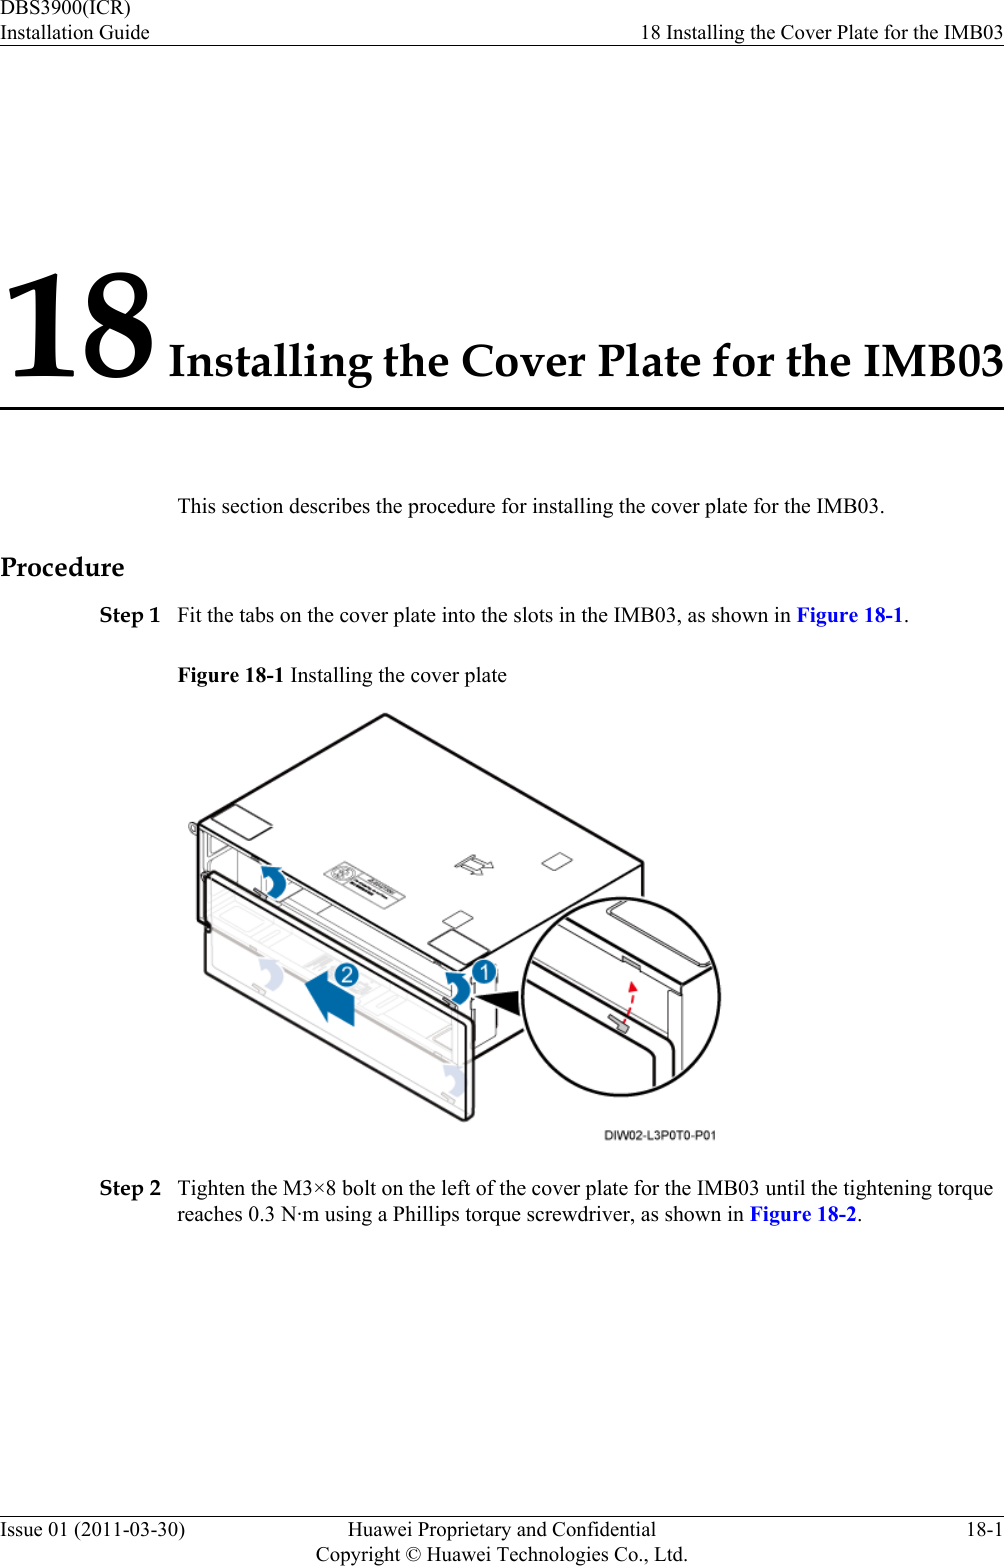 18 Installing the Cover Plate for the IMB03This section describes the procedure for installing the cover plate for the IMB03.ProcedureStep 1 Fit the tabs on the cover plate into the slots in the IMB03, as shown in Figure 18-1.Figure 18-1 Installing the cover plateStep 2 Tighten the M3×8 bolt on the left of the cover plate for the IMB03 until the tightening torquereaches 0.3 N·m using a Phillips torque screwdriver, as shown in Figure 18-2.DBS3900(ICR)Installation Guide 18 Installing the Cover Plate for the IMB03Issue 01 (2011-03-30) Huawei Proprietary and ConfidentialCopyright © Huawei Technologies Co., Ltd.18-1